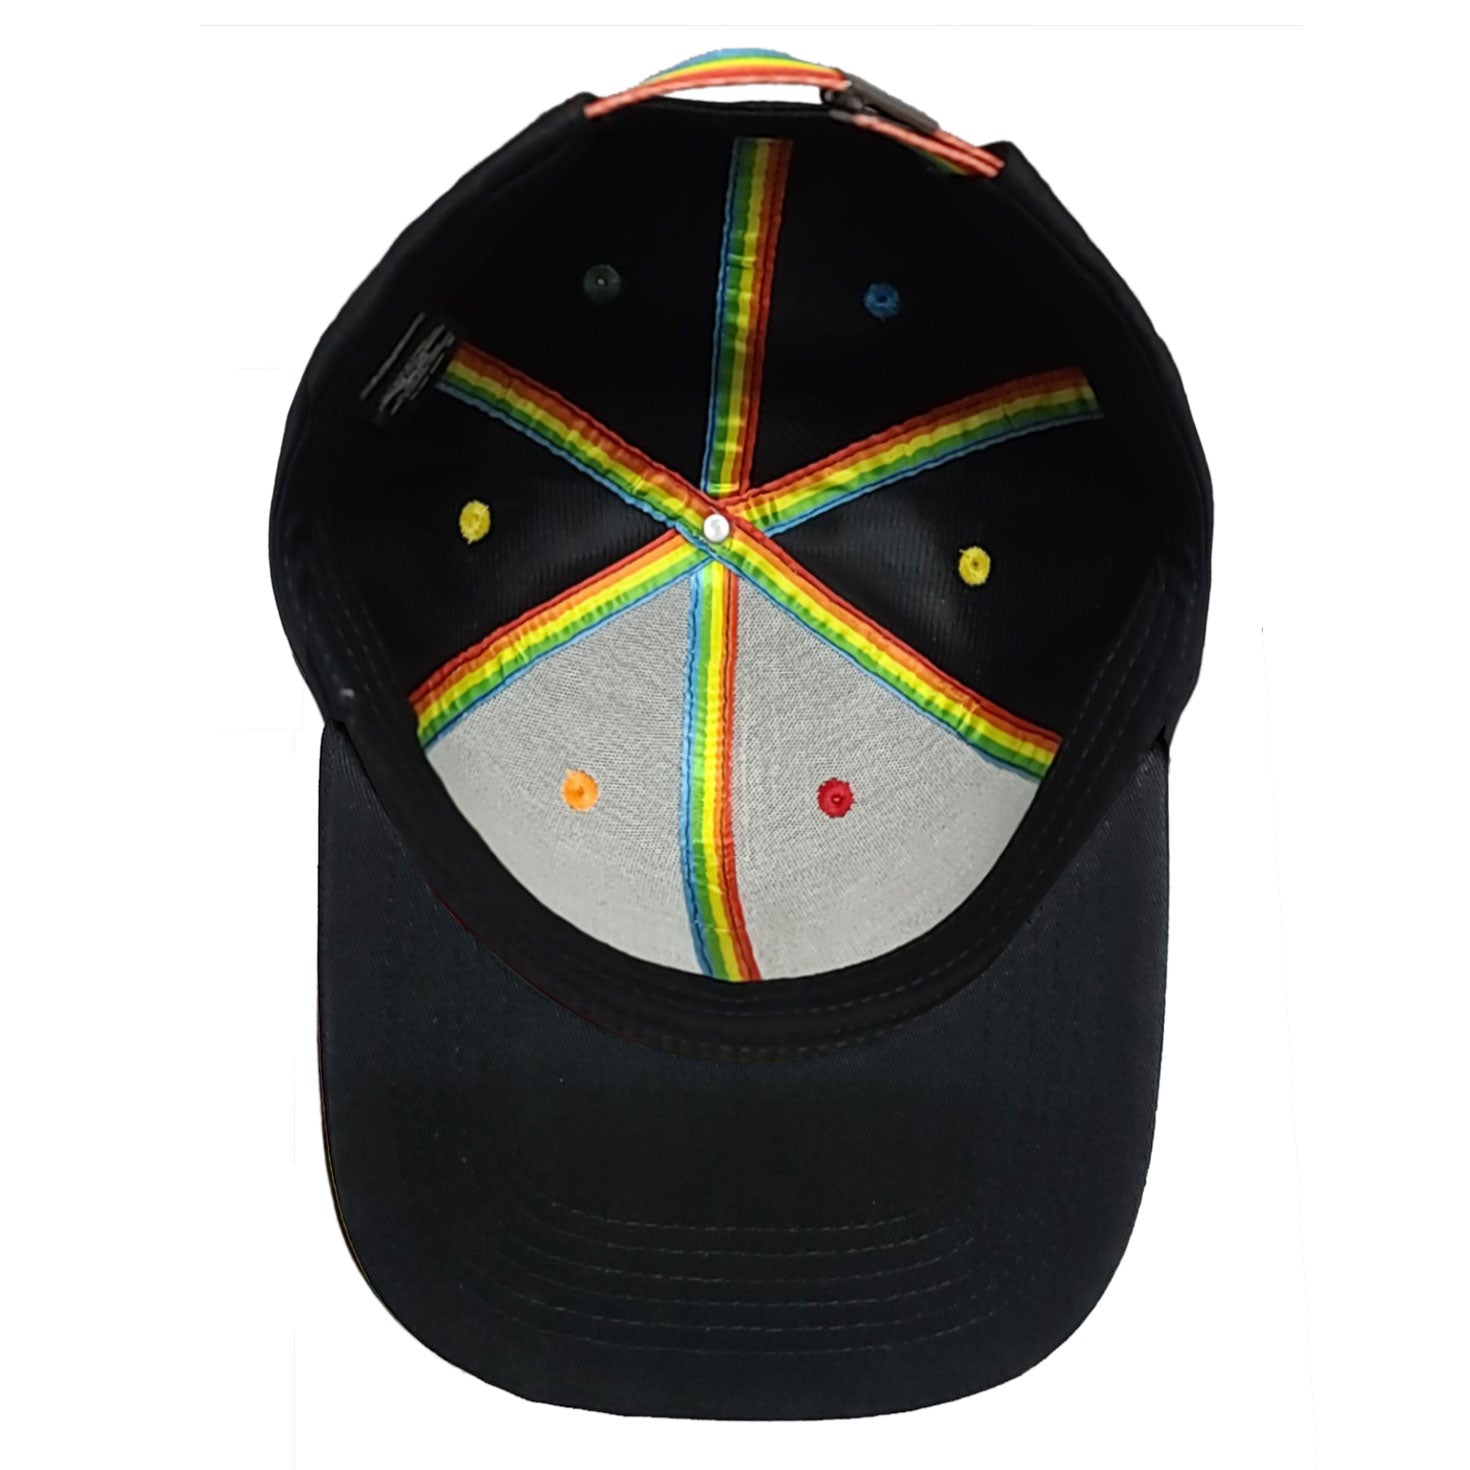 Laser Blasters Commander Patch Cap with Activision Rainbow Lining and Details